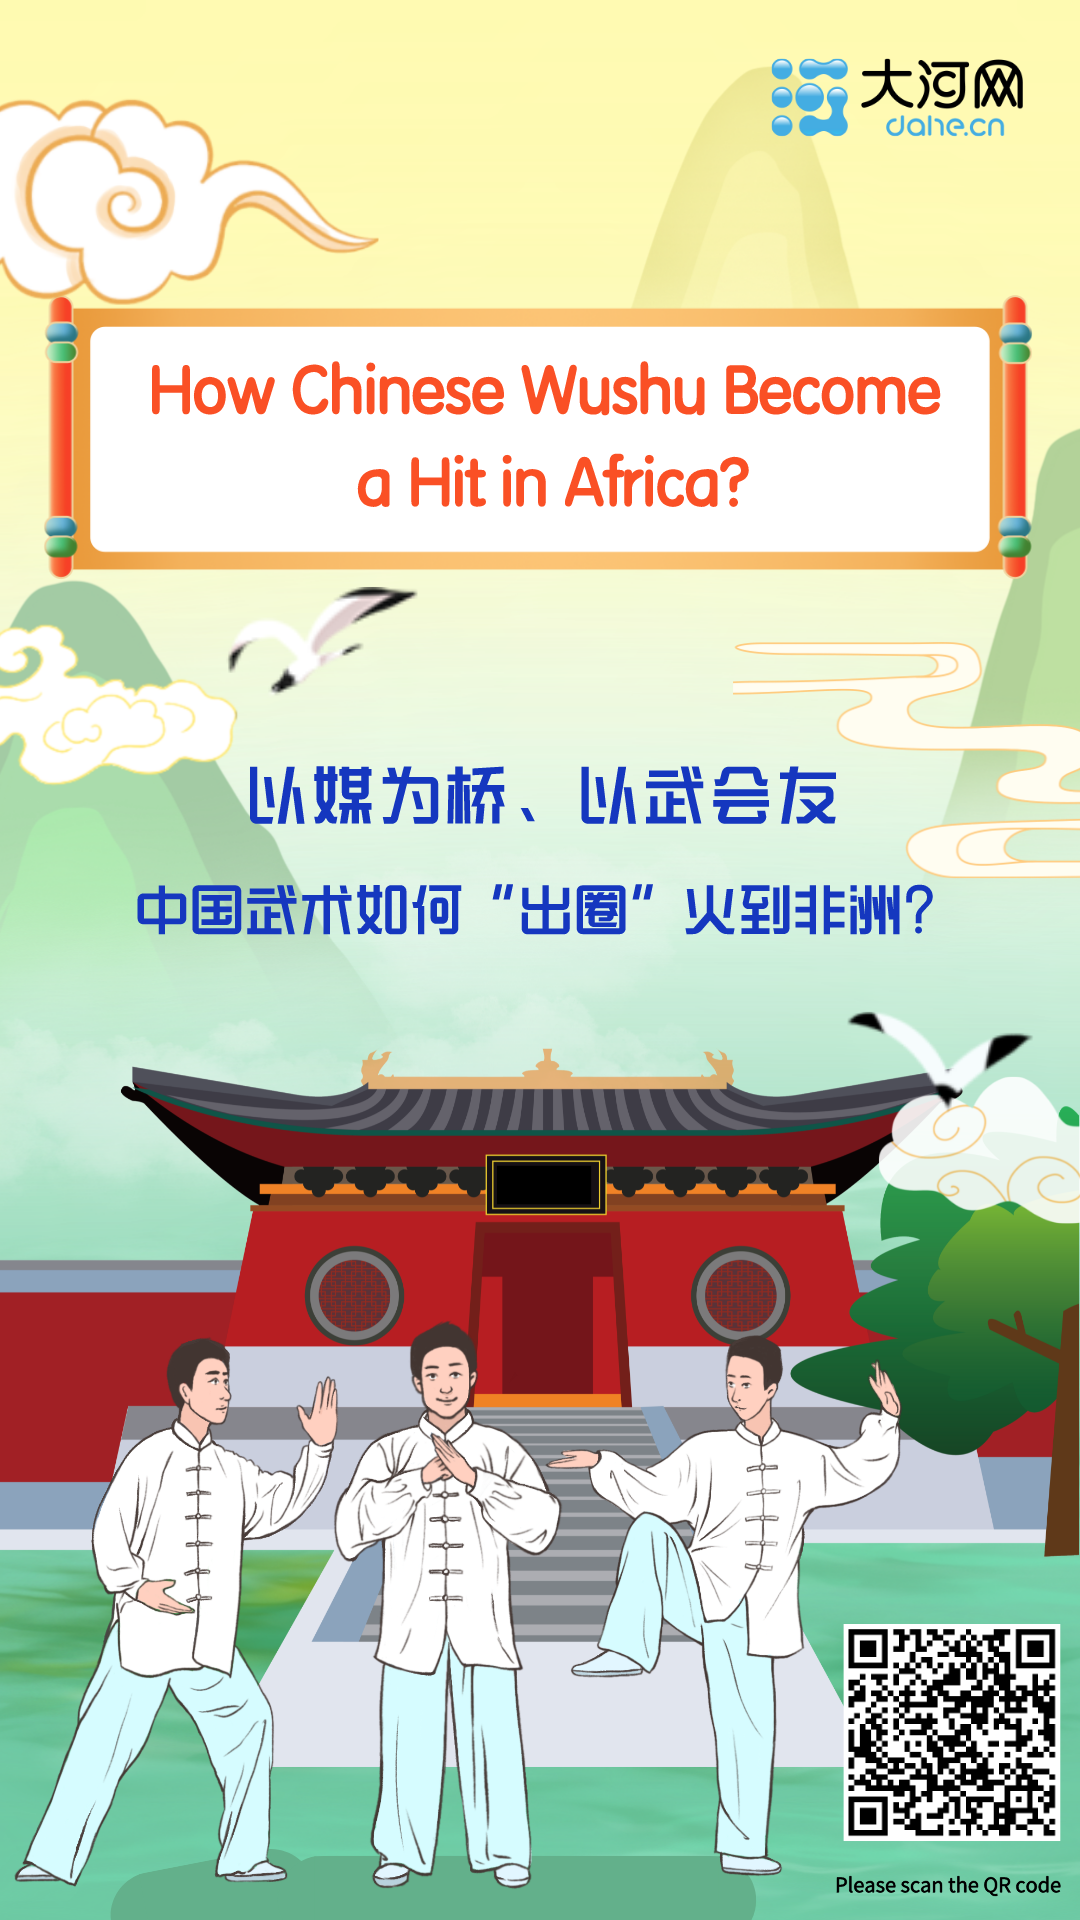 How Chinese Wushu Become a Hit in Africa?